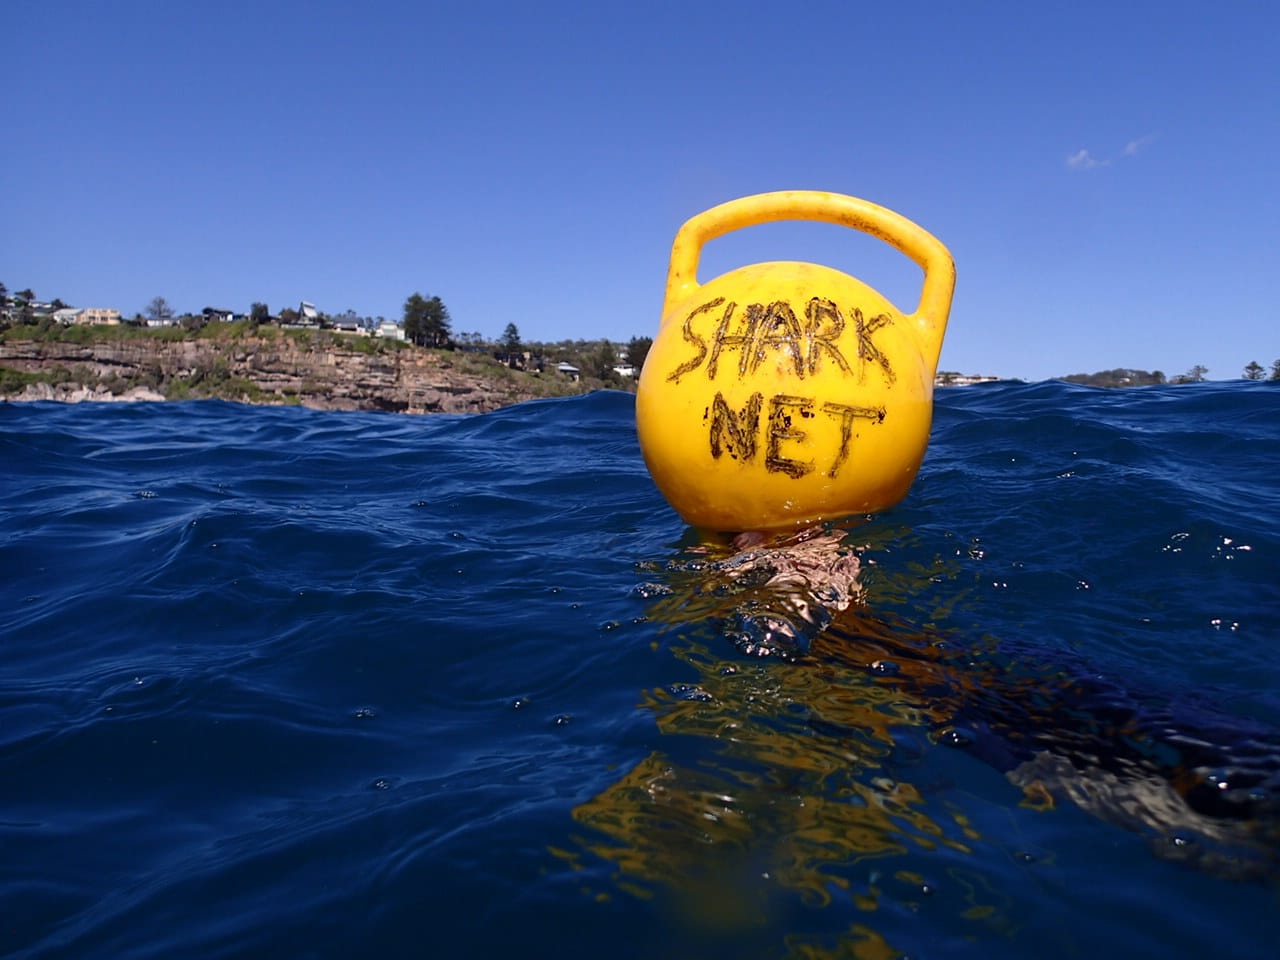 Government told to stop pretending the shark nets  benefit public safety